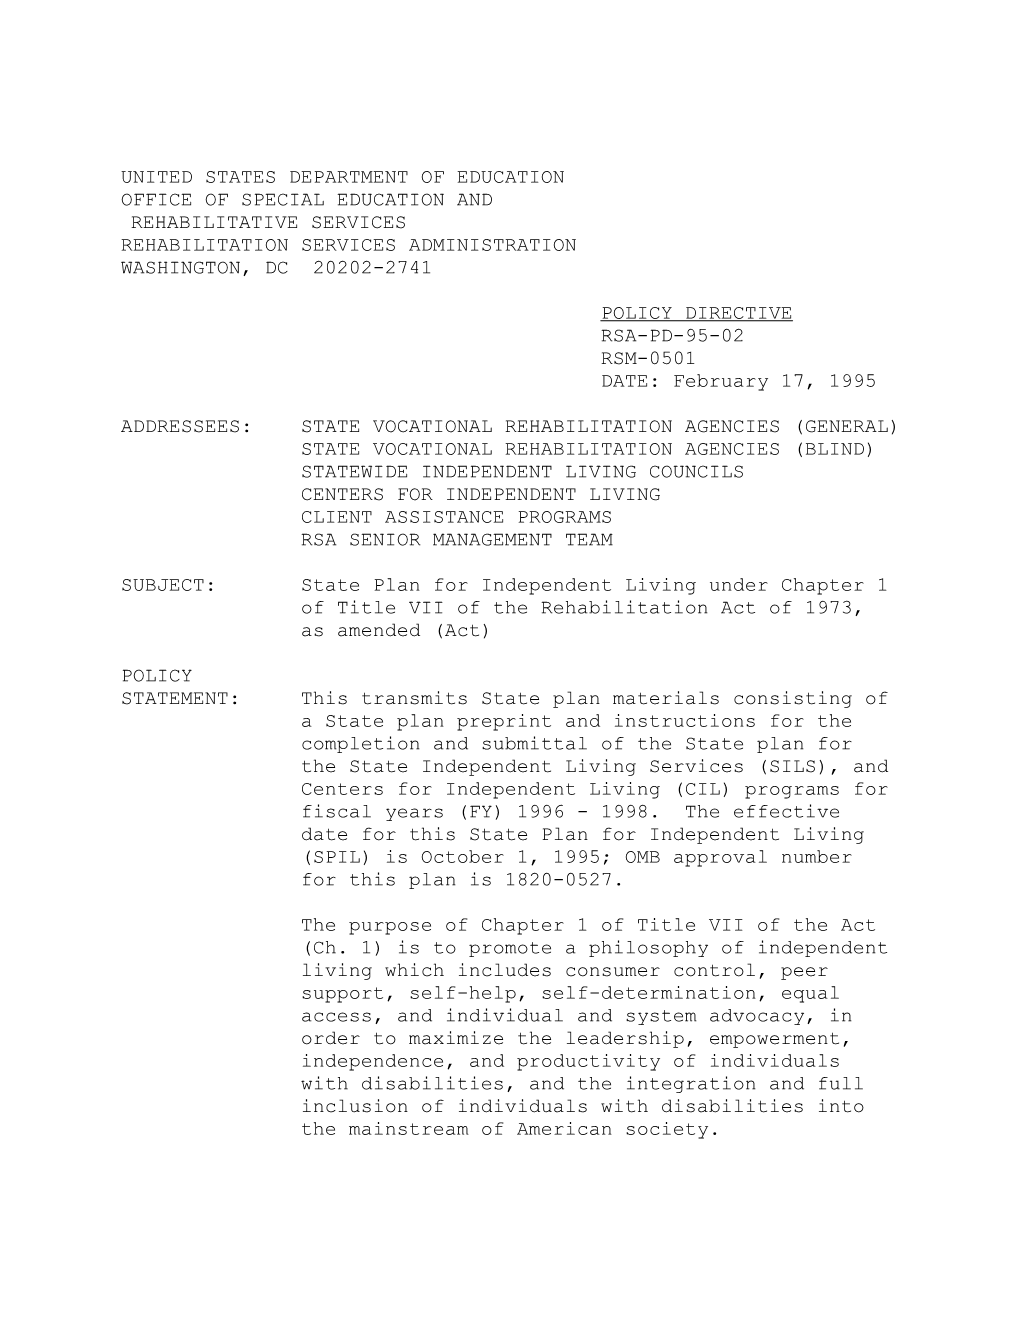 RSA-PD-95-02: State Plan for Independent Living Under Chapter 1 of Title VII of The